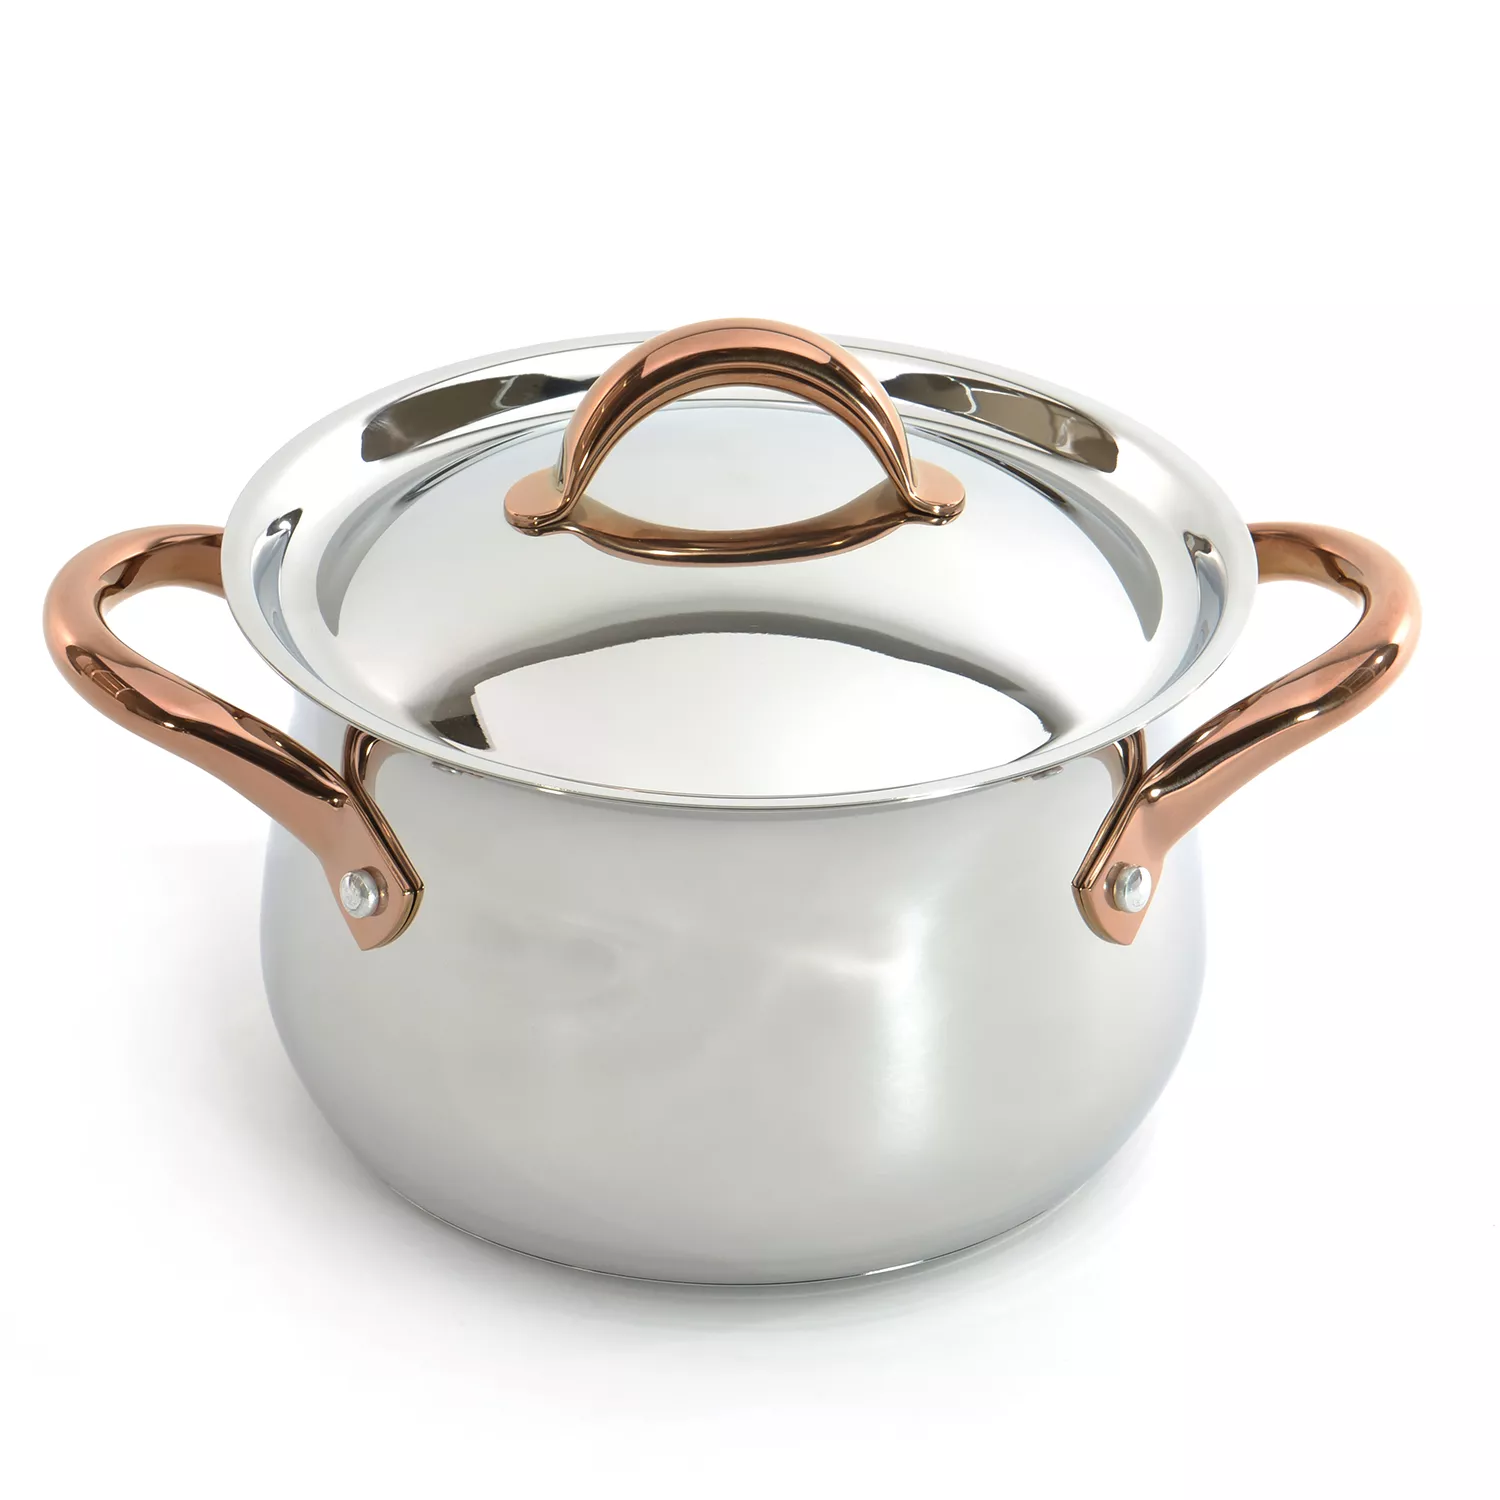 14-PC. Stainless Steel Cookware Set with Gold Accents